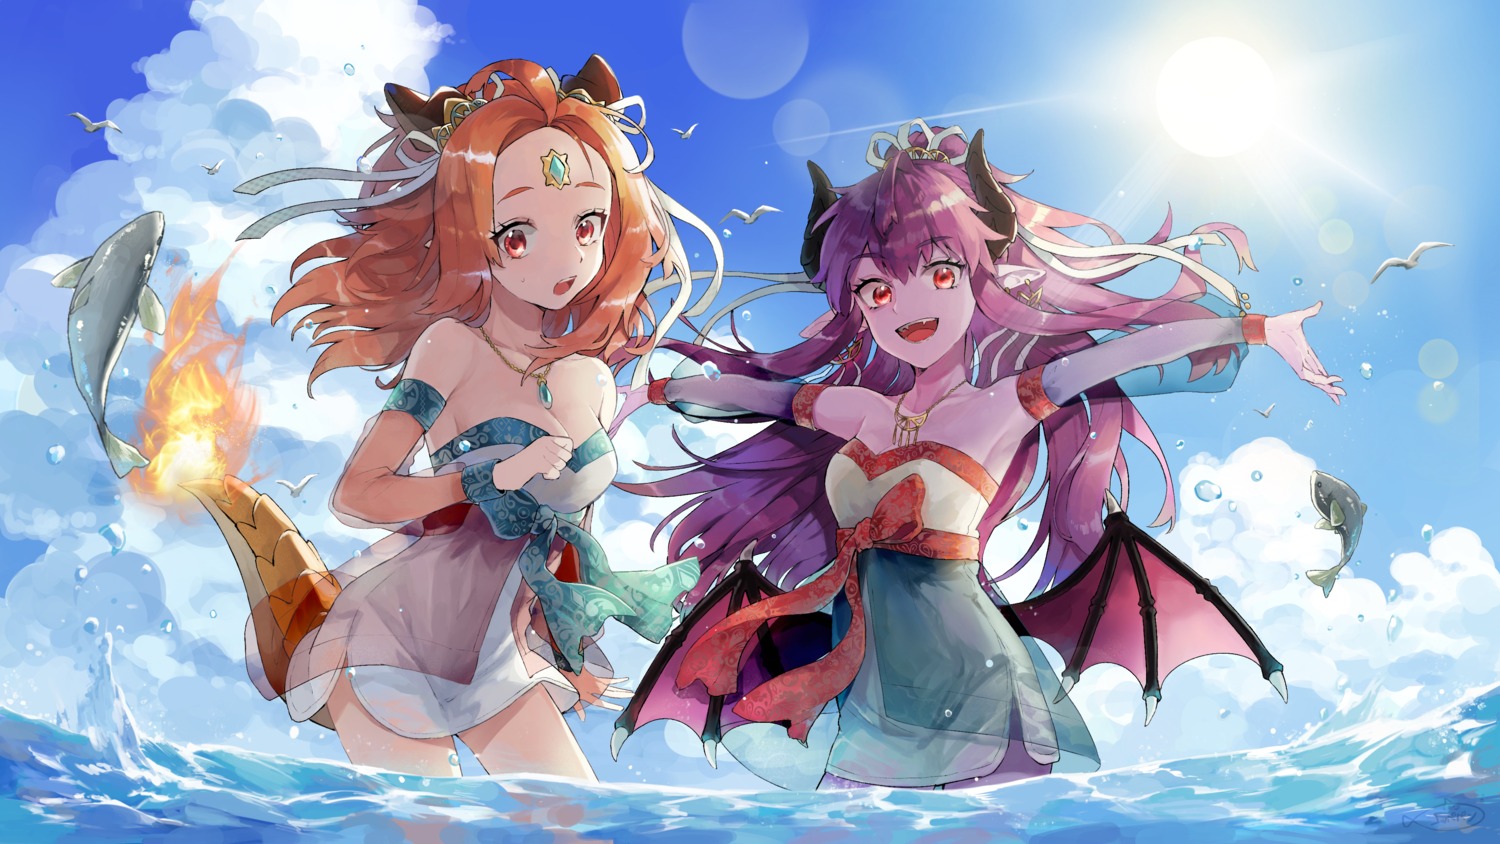 cleavage coppepan dress horns no_bra pointy_ears see_through tail wallpaper wet wings